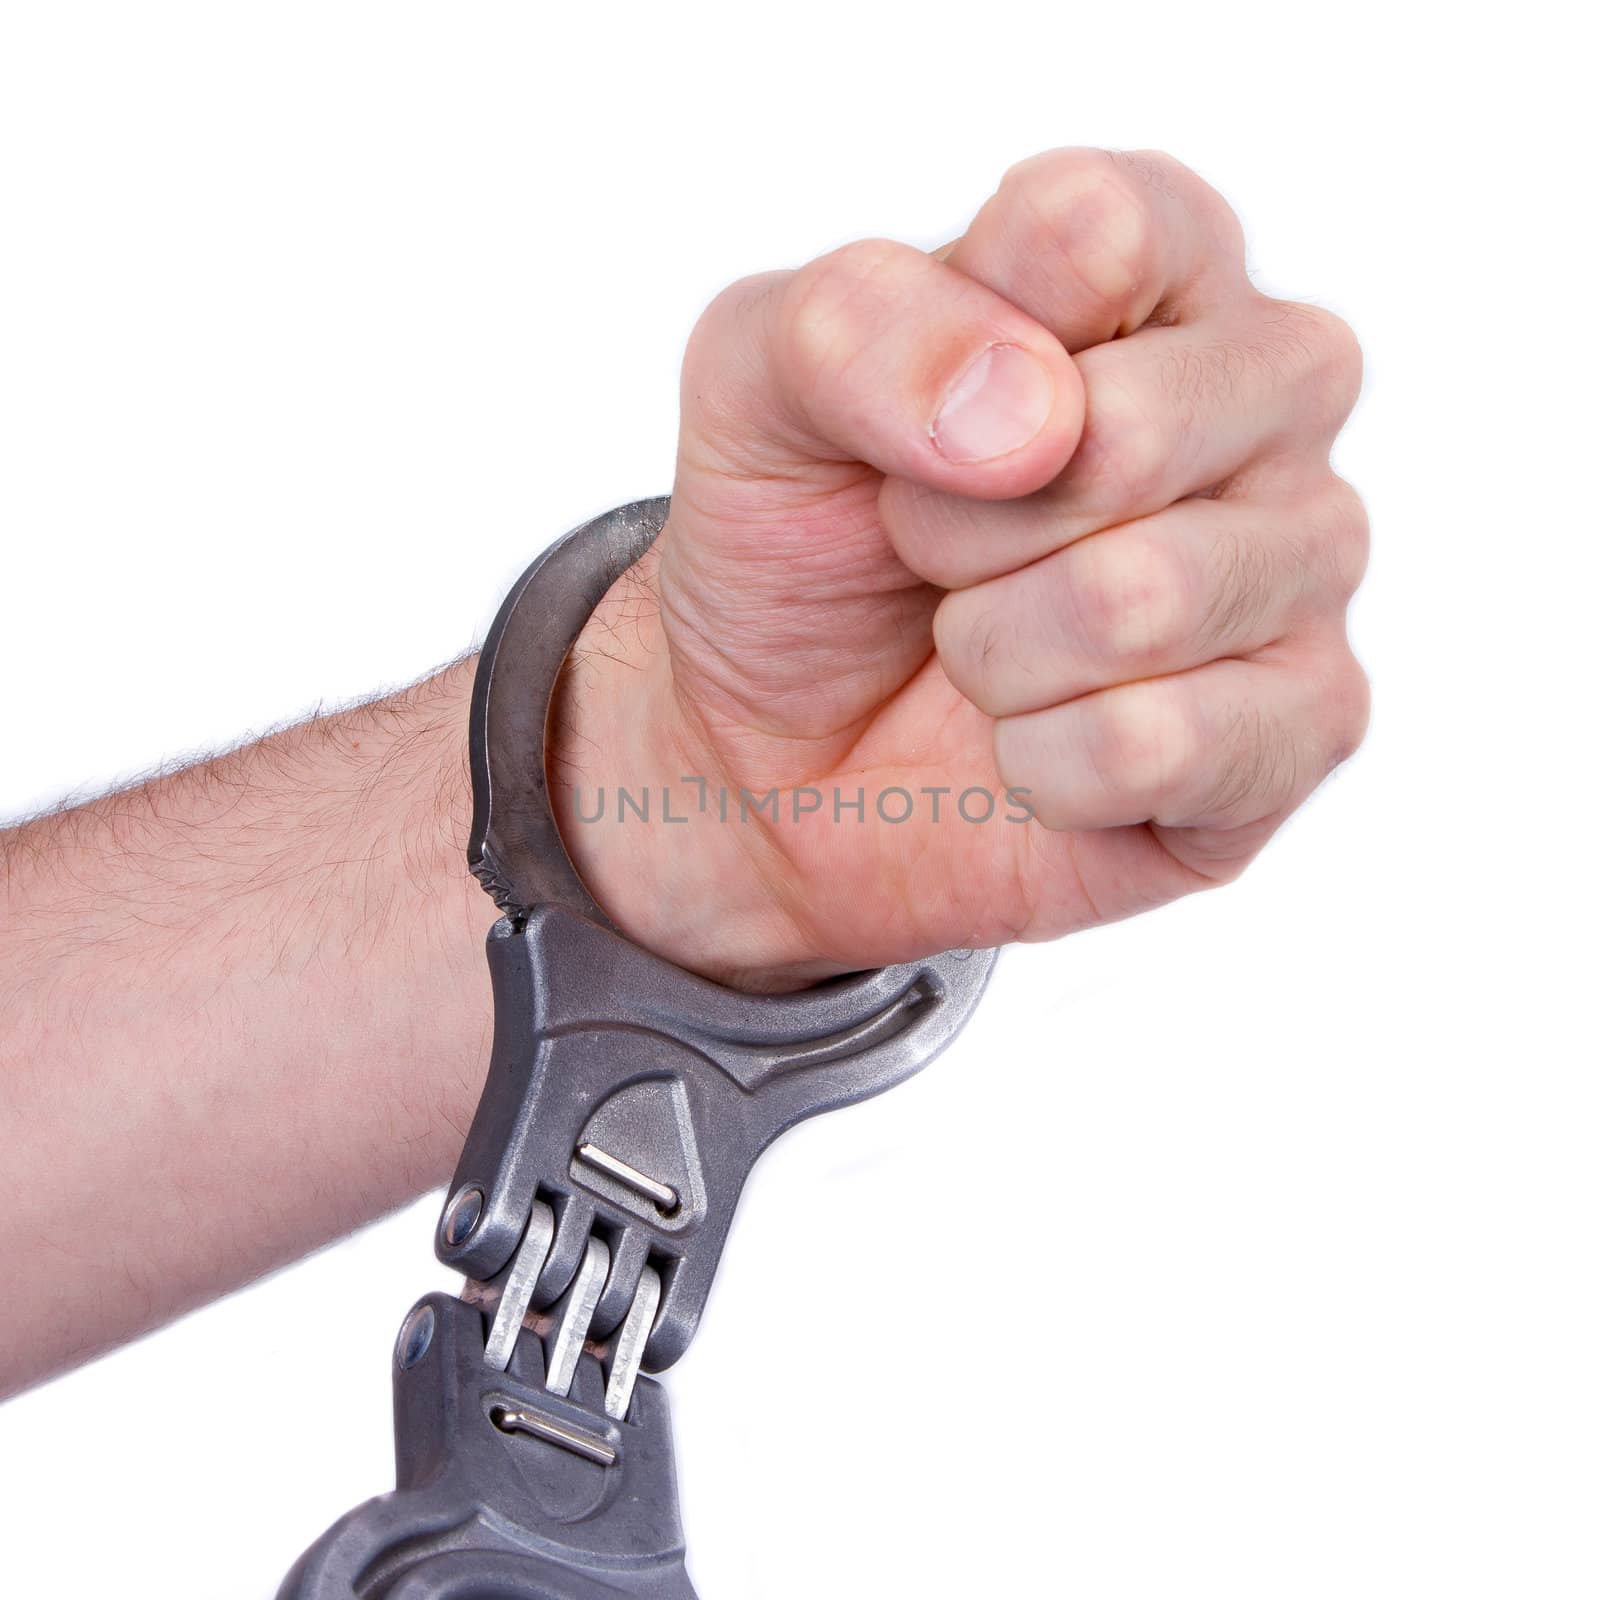 A man in metal handcuffs on a white background by michaklootwijk